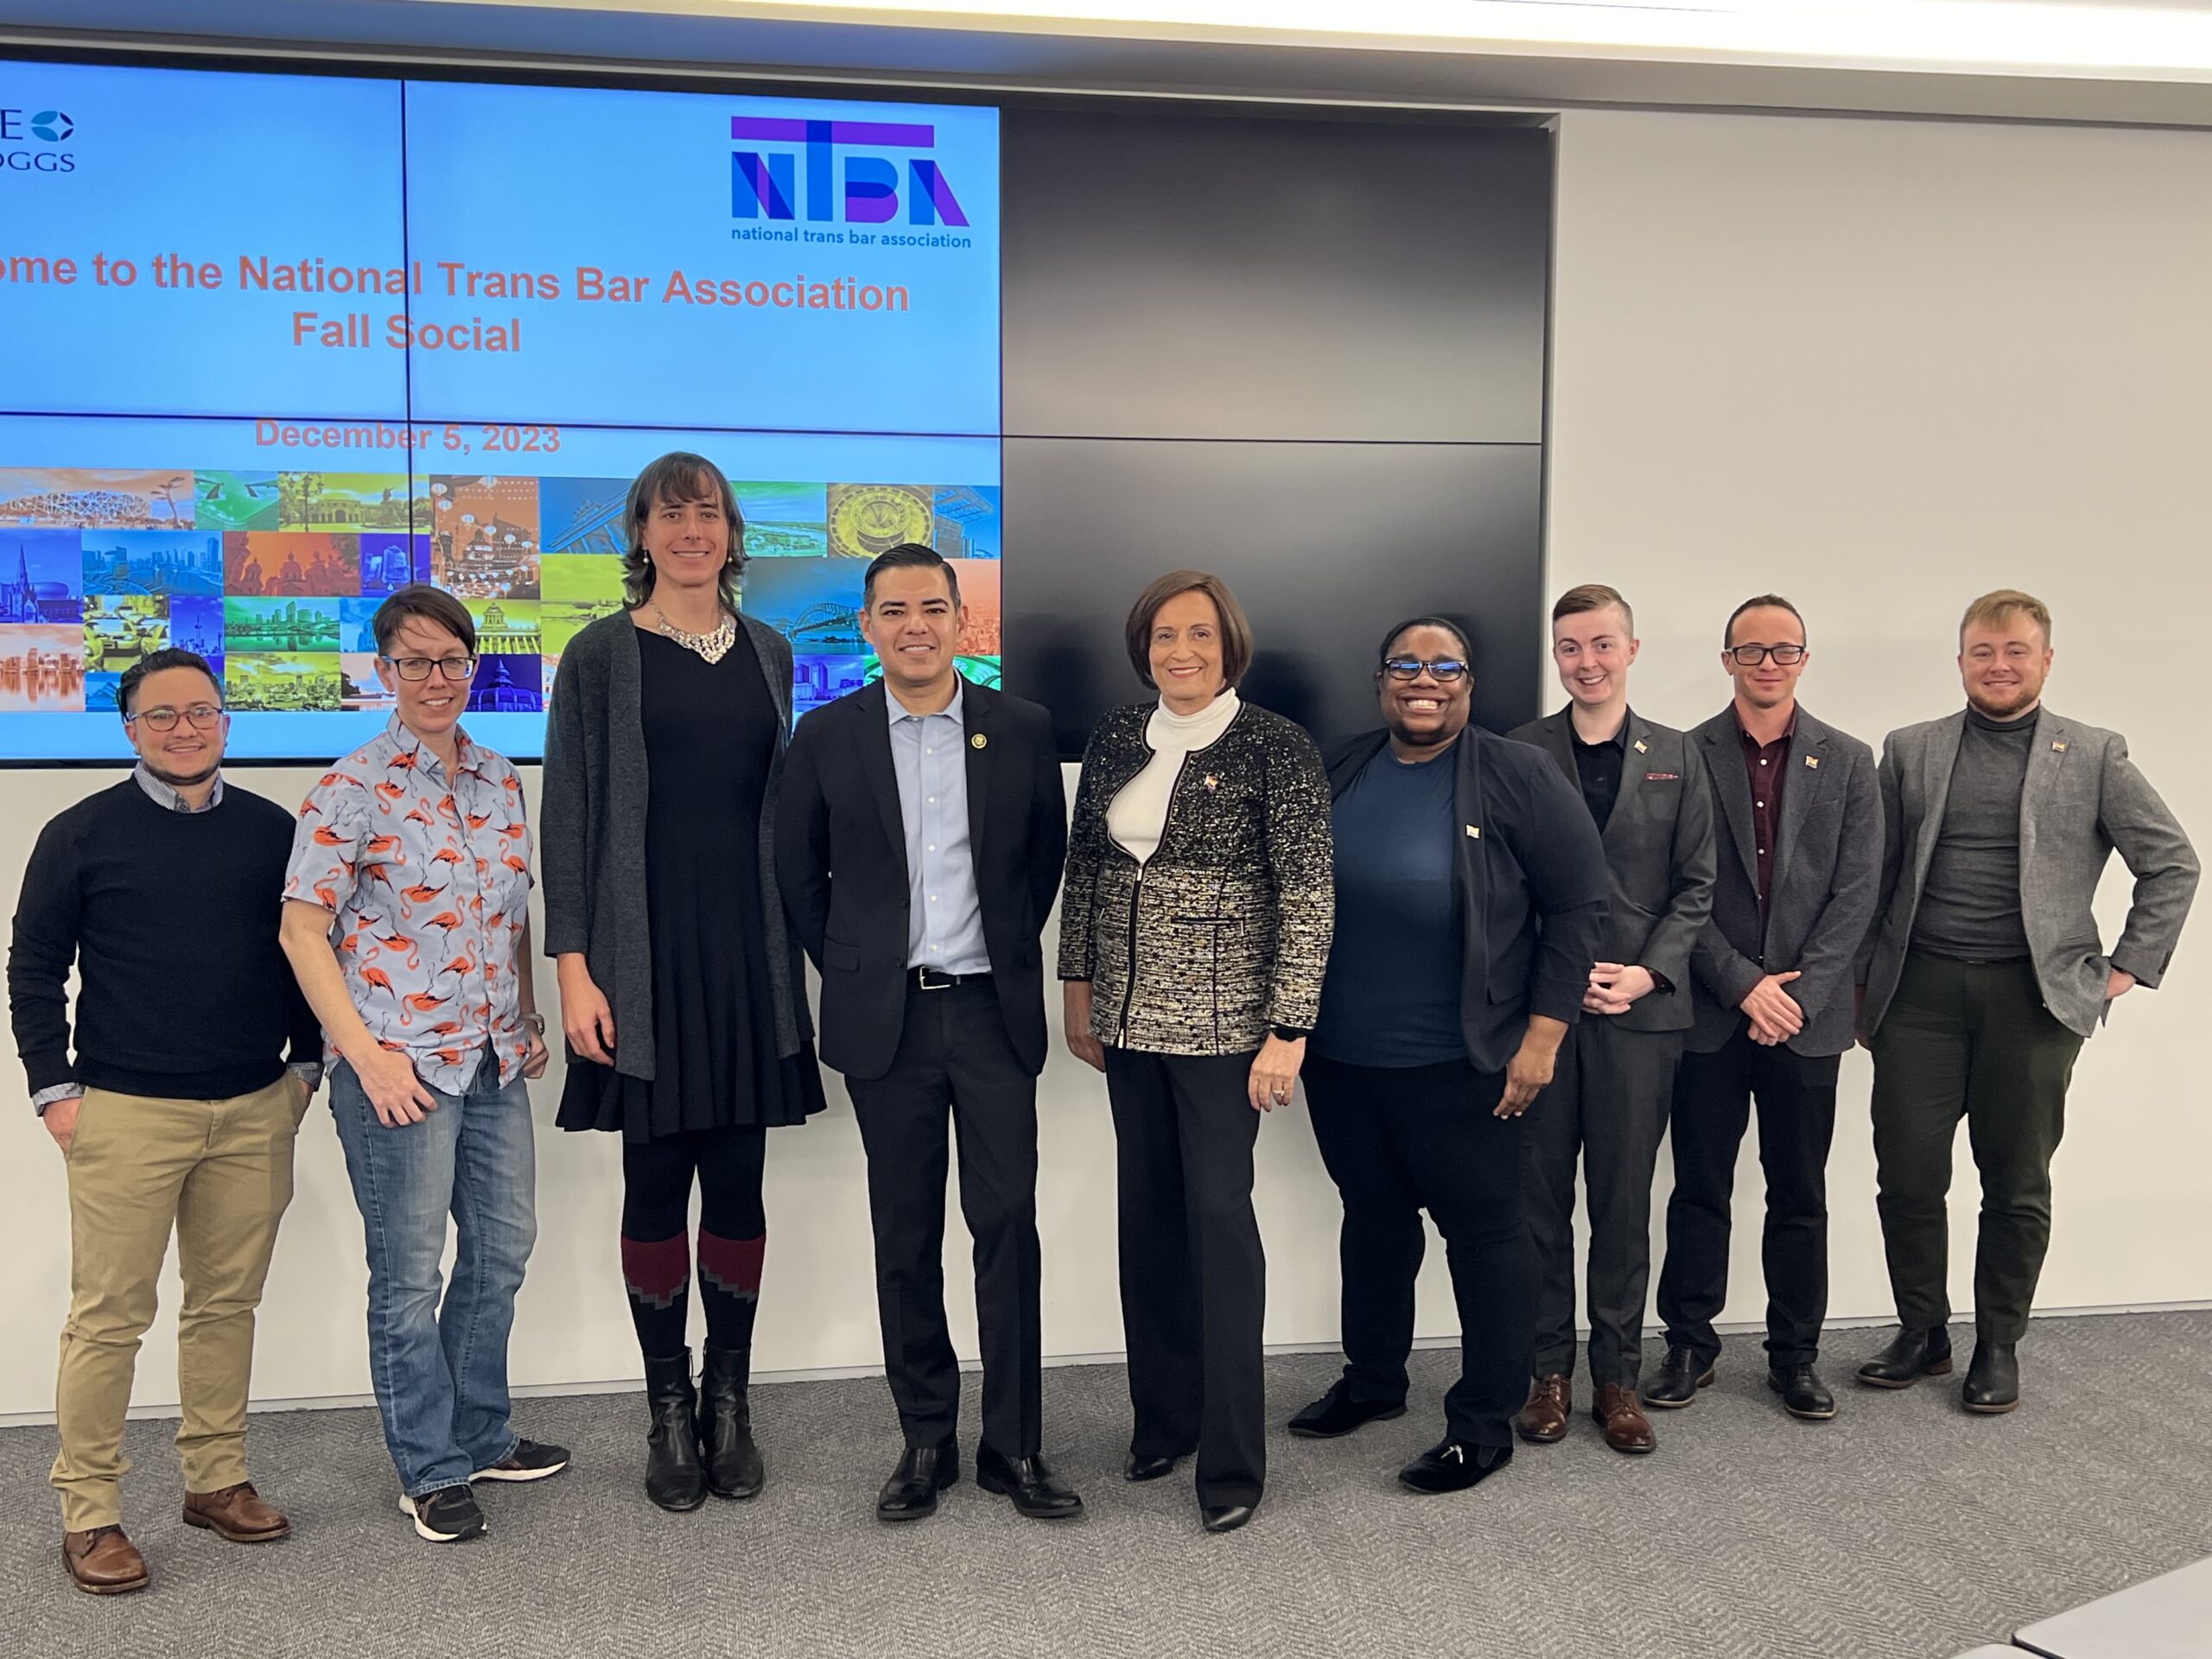 Members of the National Trans Bar Association (NTBA) and guests gather at the Fall Social in Washington D.C., celebrating the historic admission of 12 transgender attorneys to the U.S. Supreme Court Bar.Photo courtesy of the National Trans Bar Association